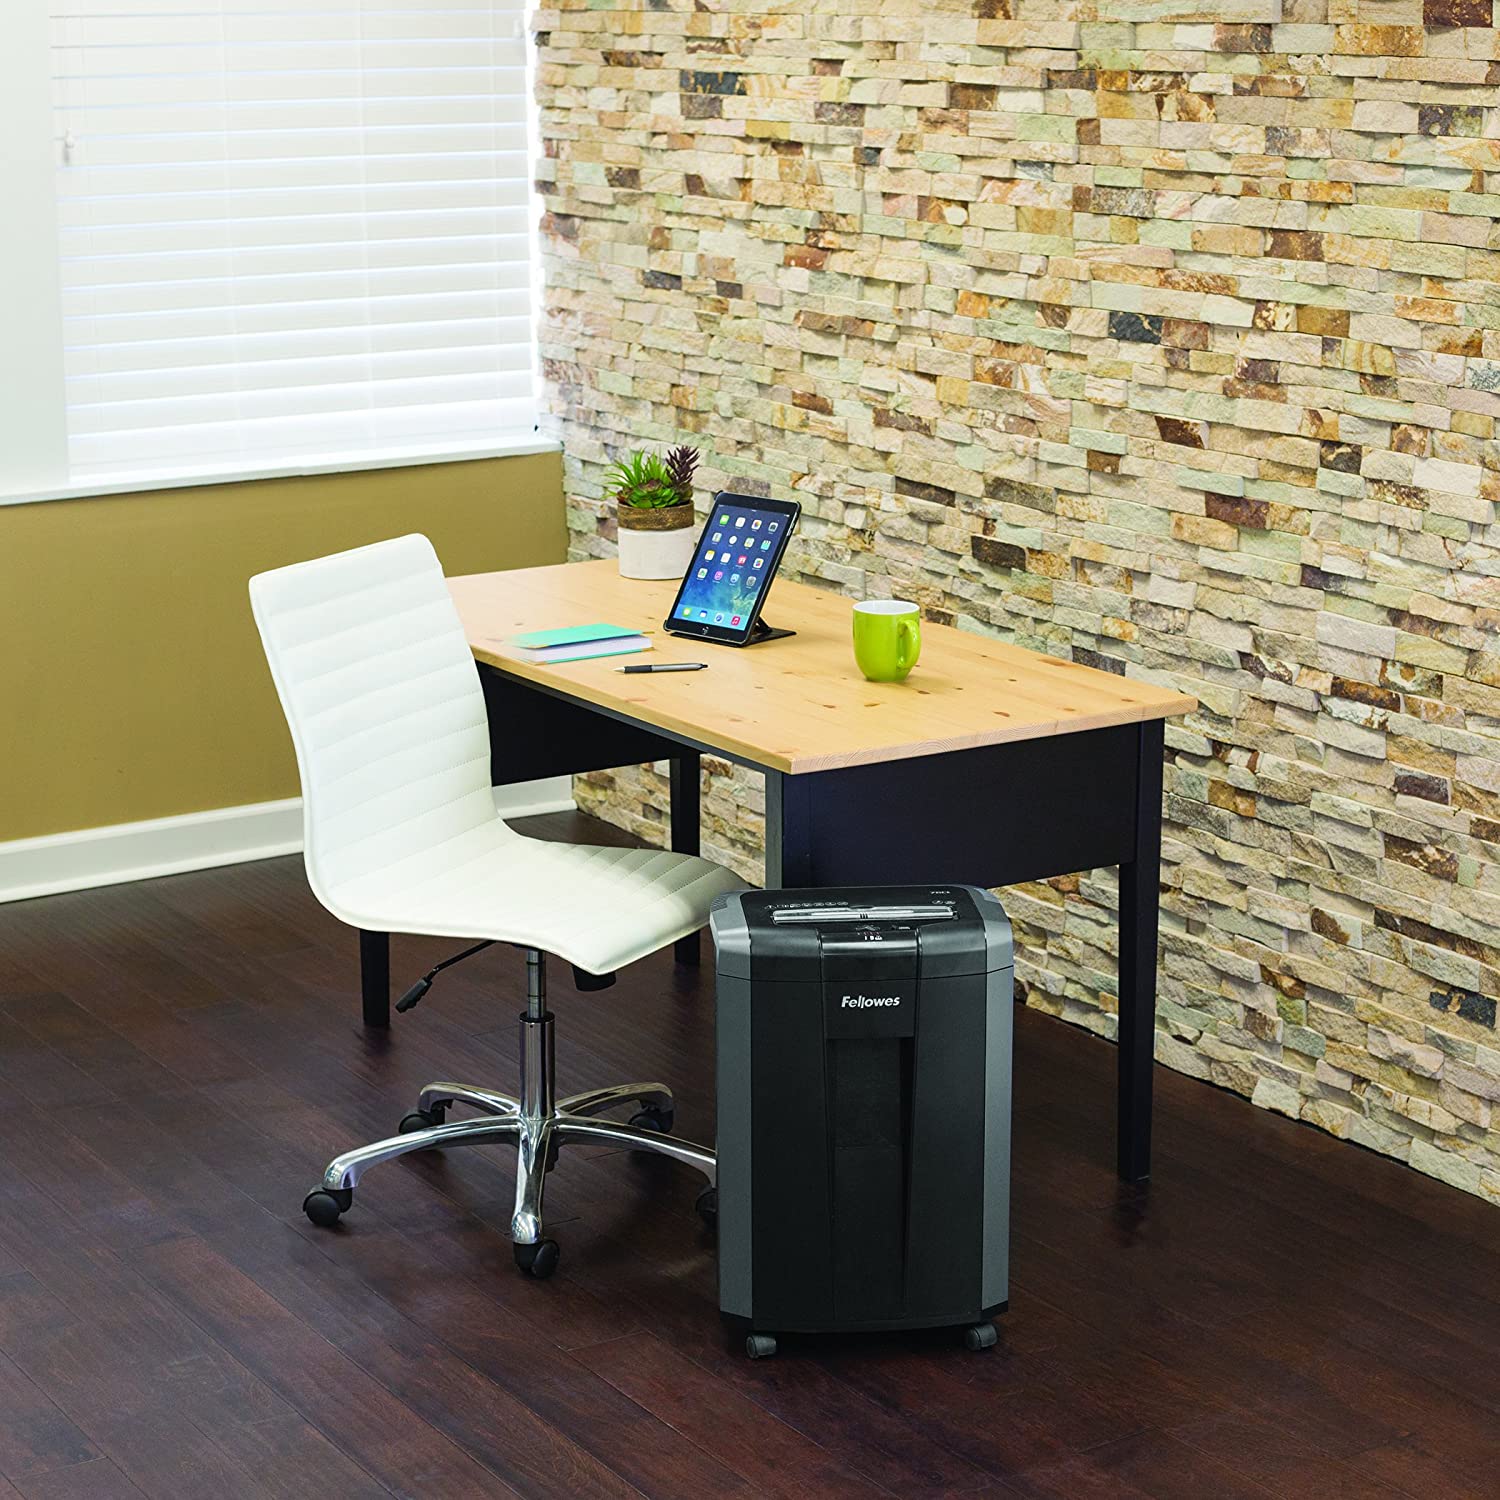 The image of Fellowes Powershred 76CT Cross Cut shredder in Office